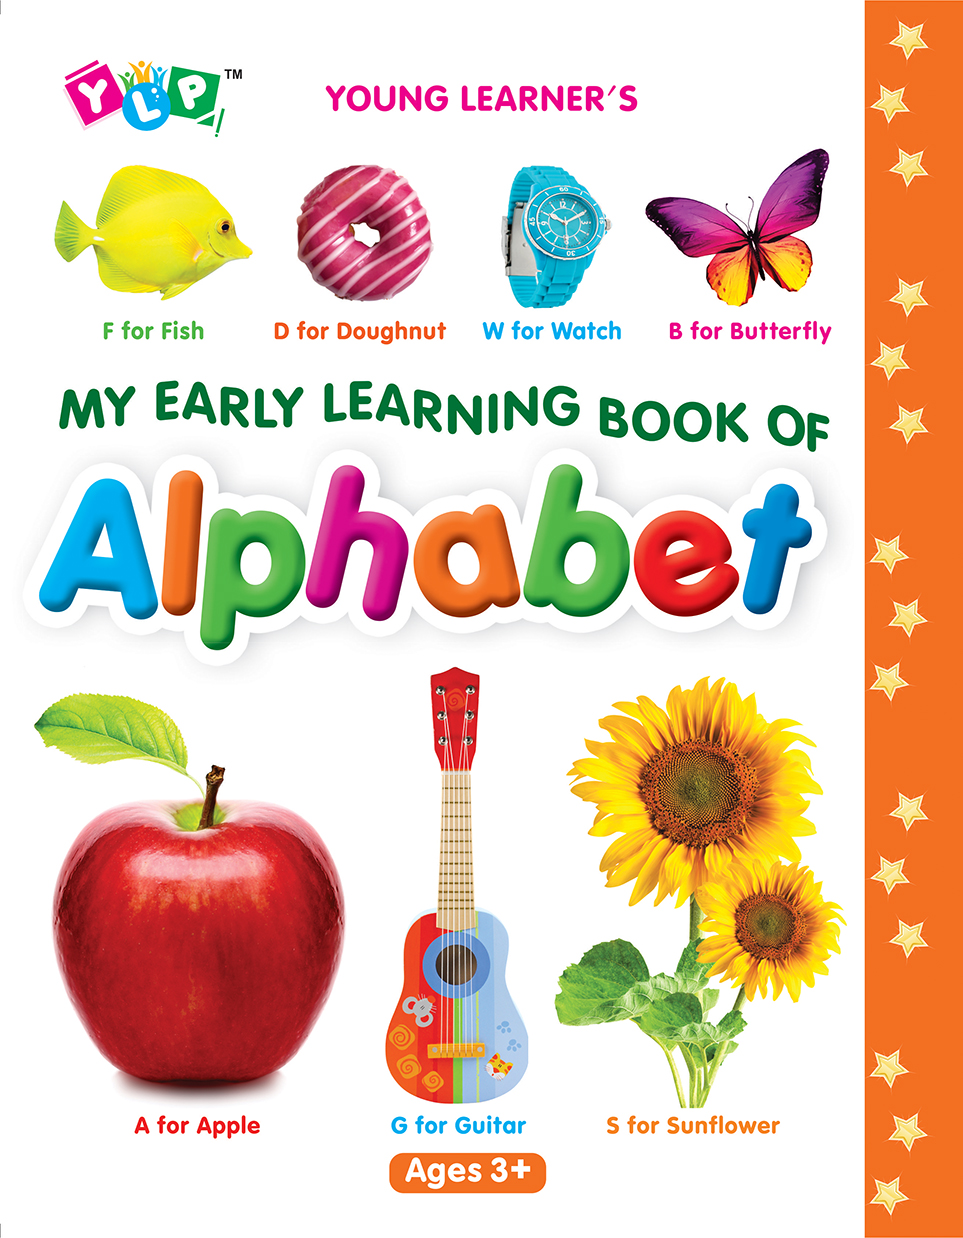 My Early Learning Book of Alphabet (Full Laminated)